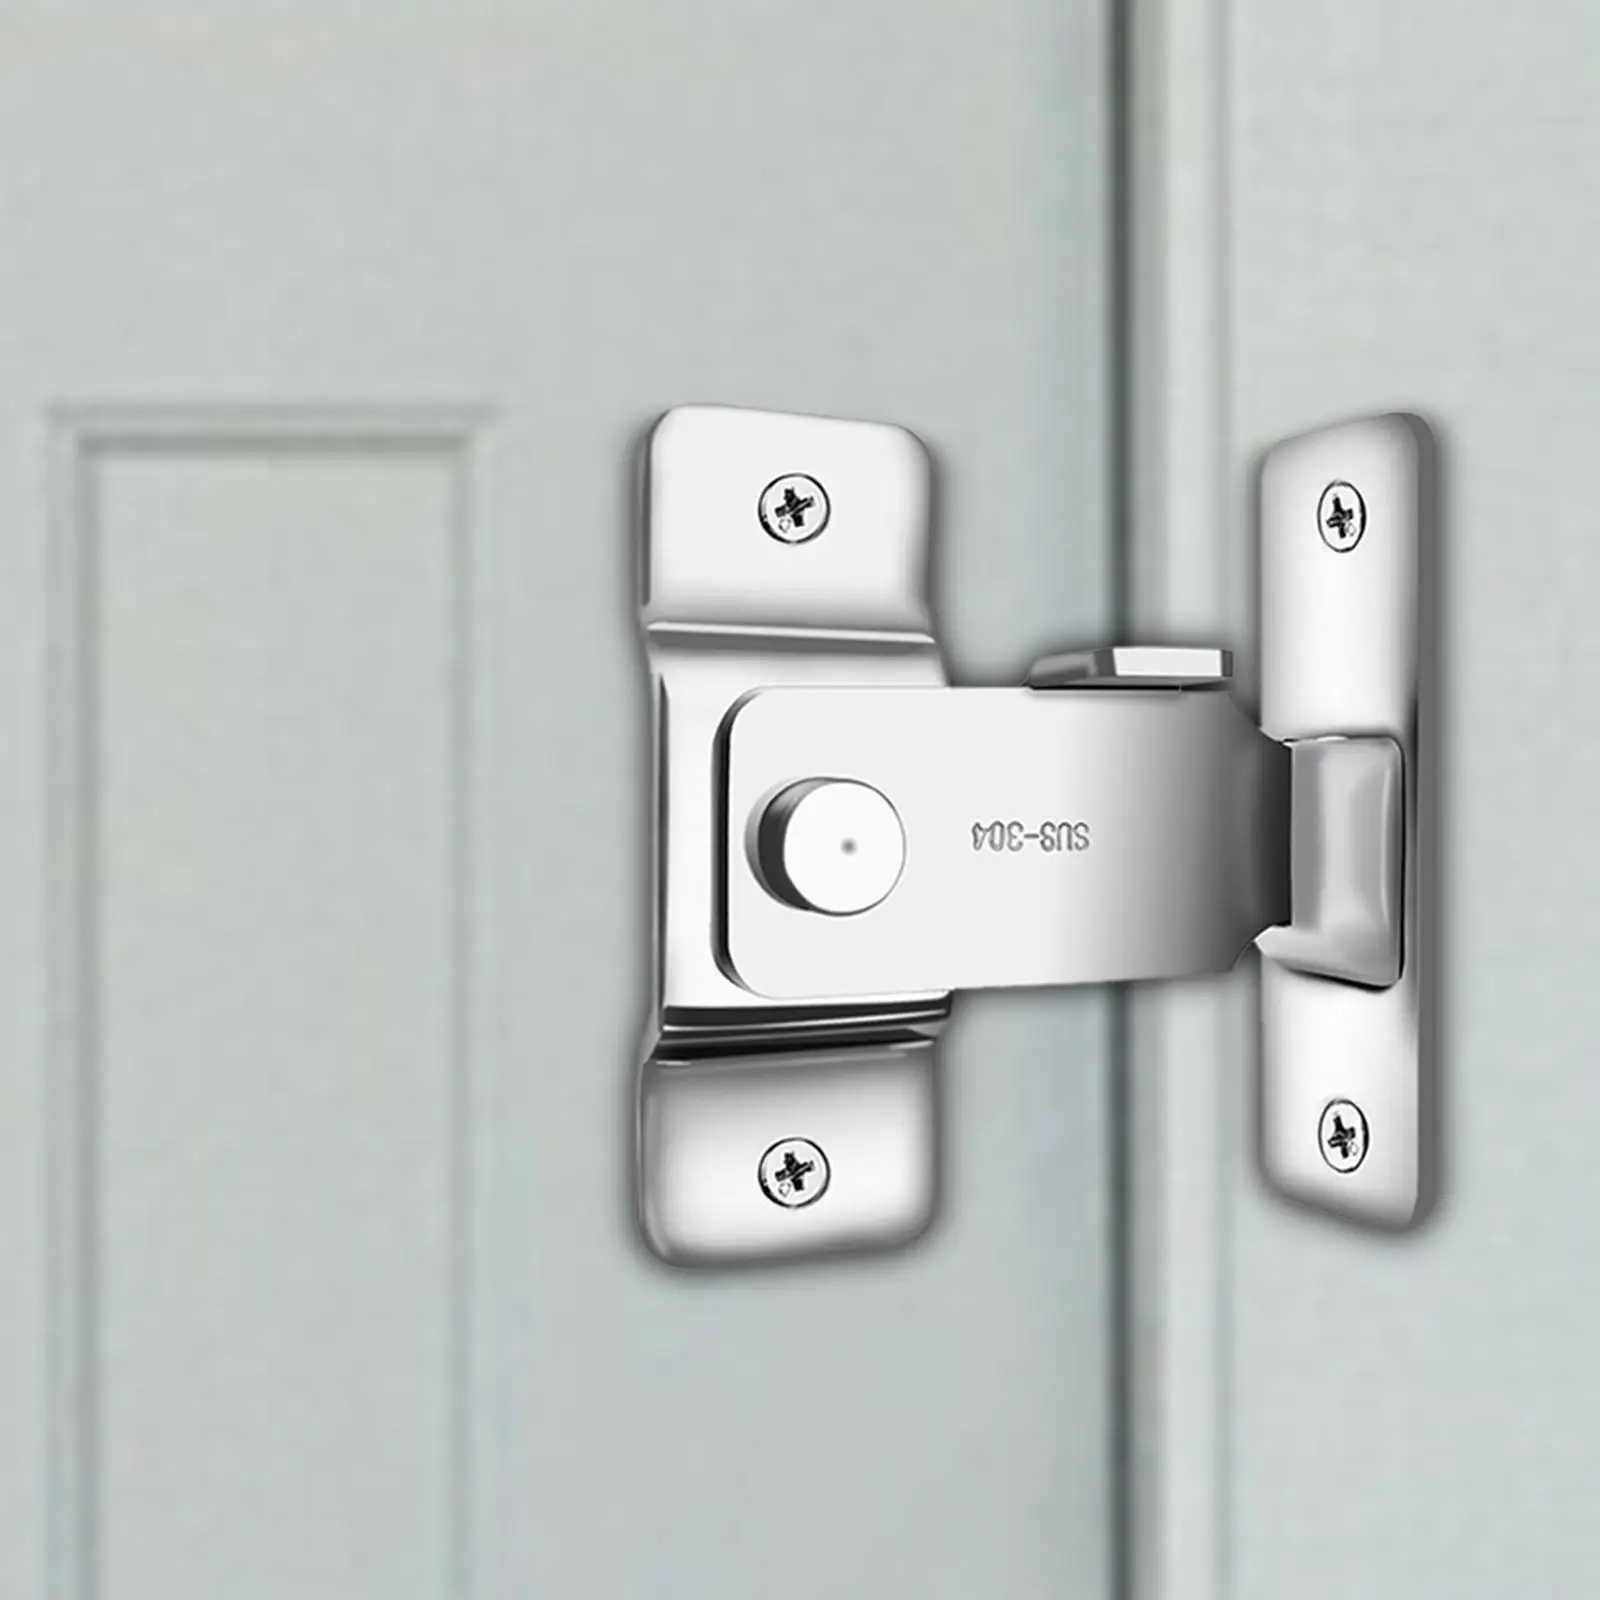 90 Degree Right Angle Door Latch Hasp Bending Latch Buckle Barn Sliding Lock with Screws for Toilet Doors and Windows